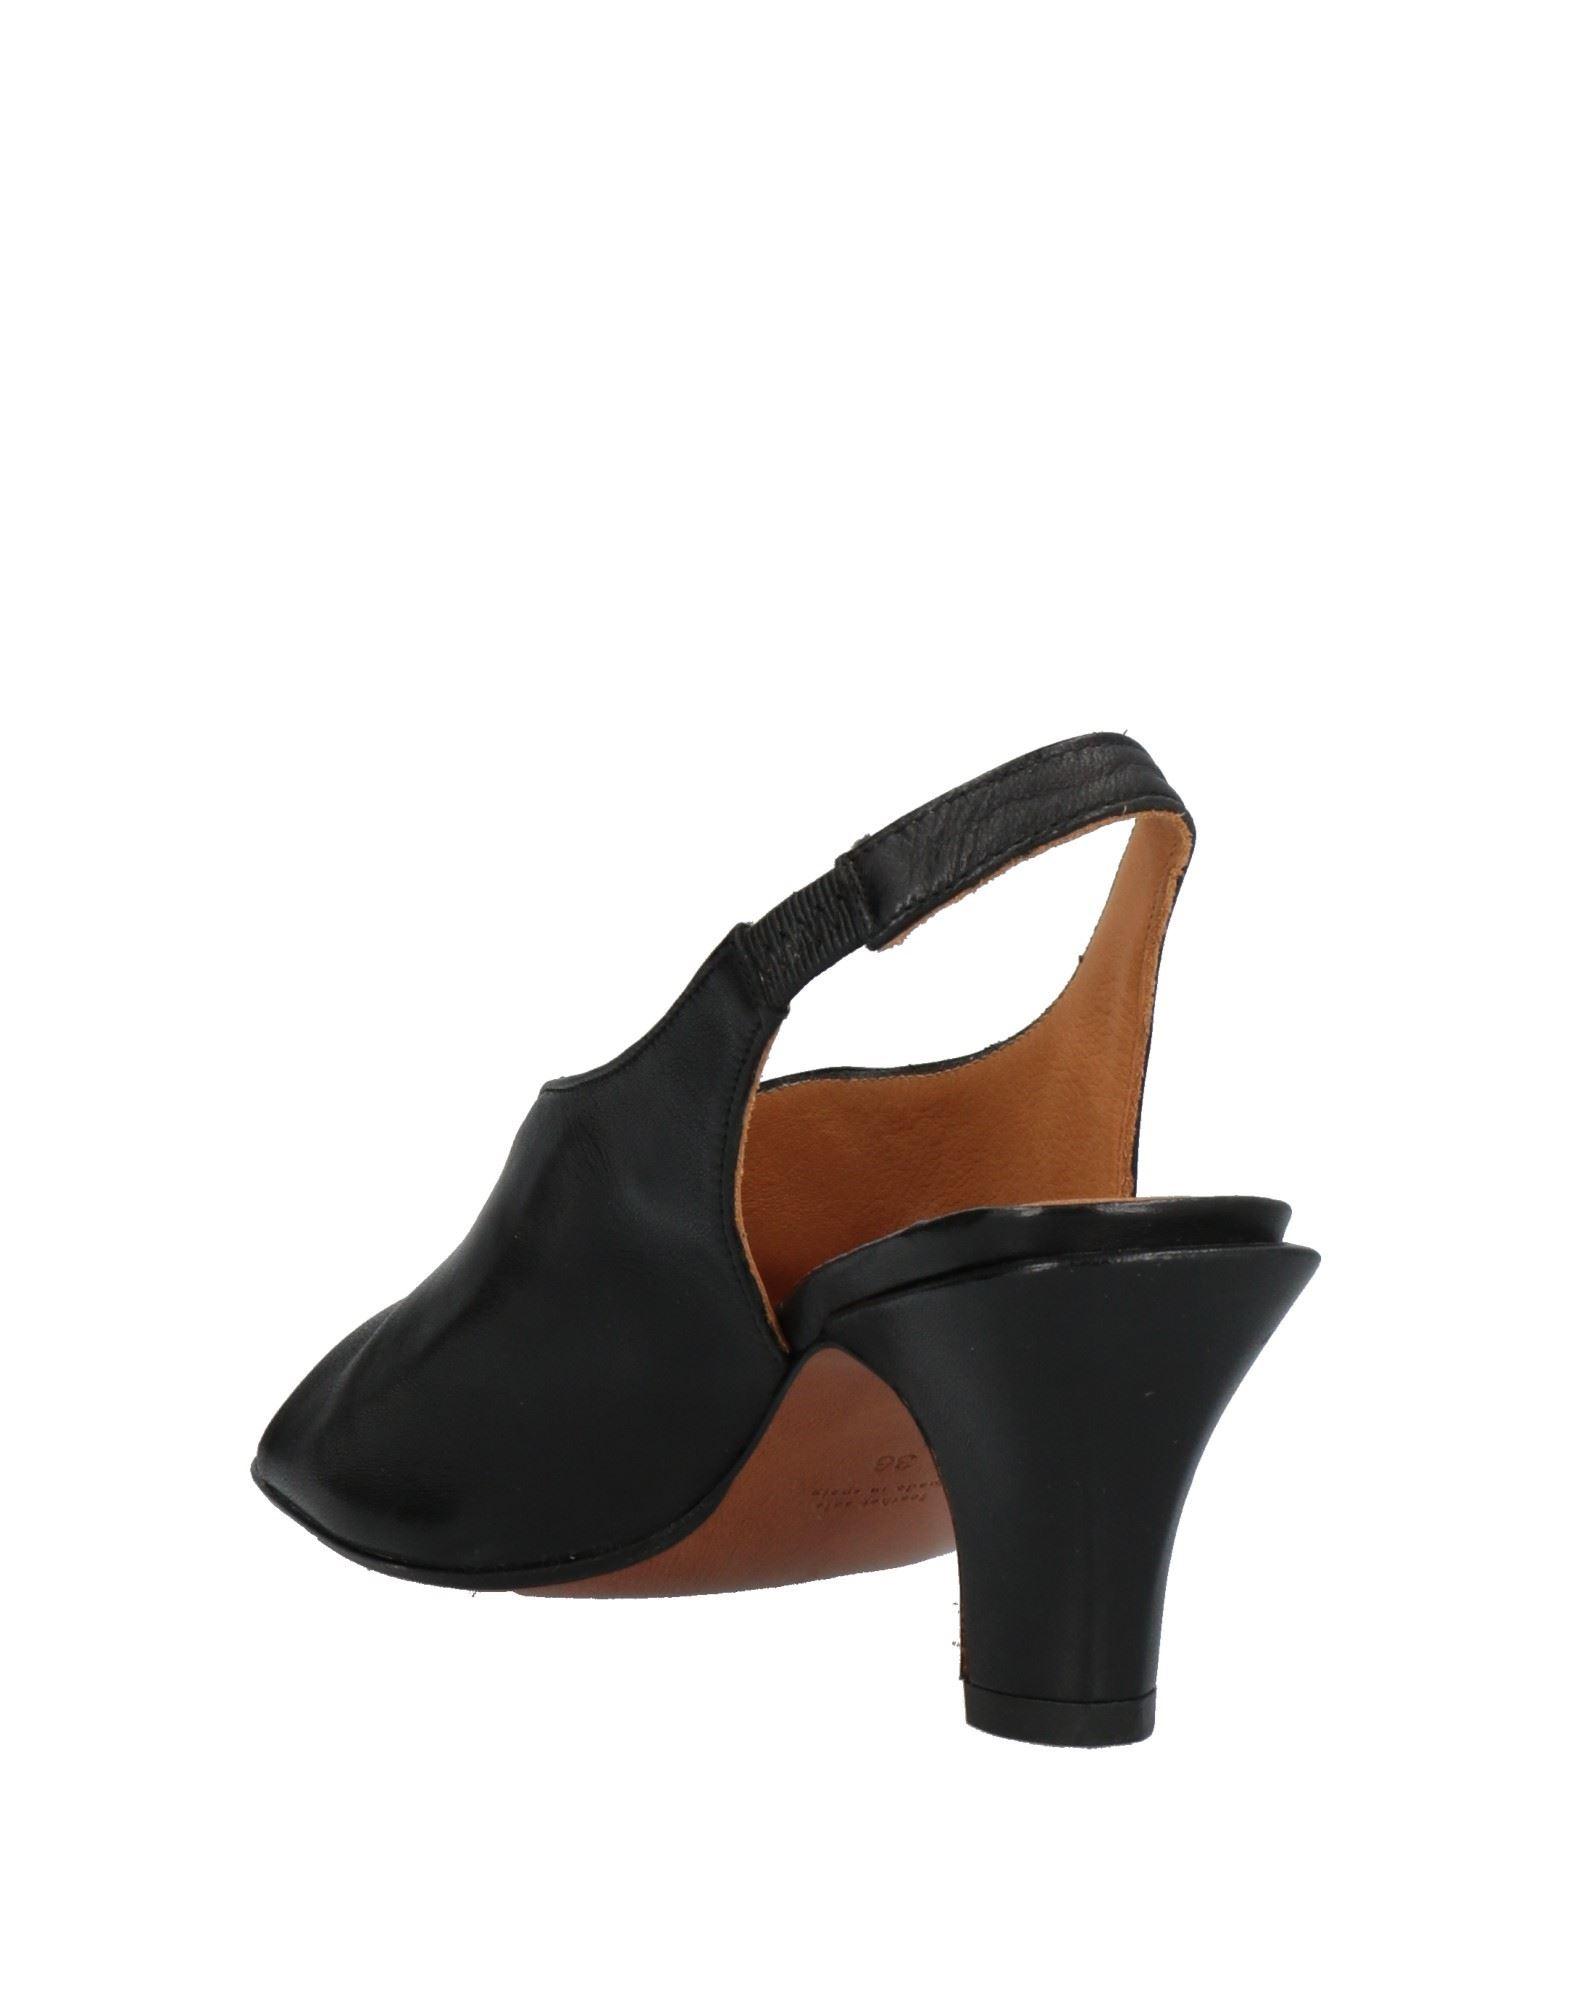 Audley Sandals in Black | Lyst